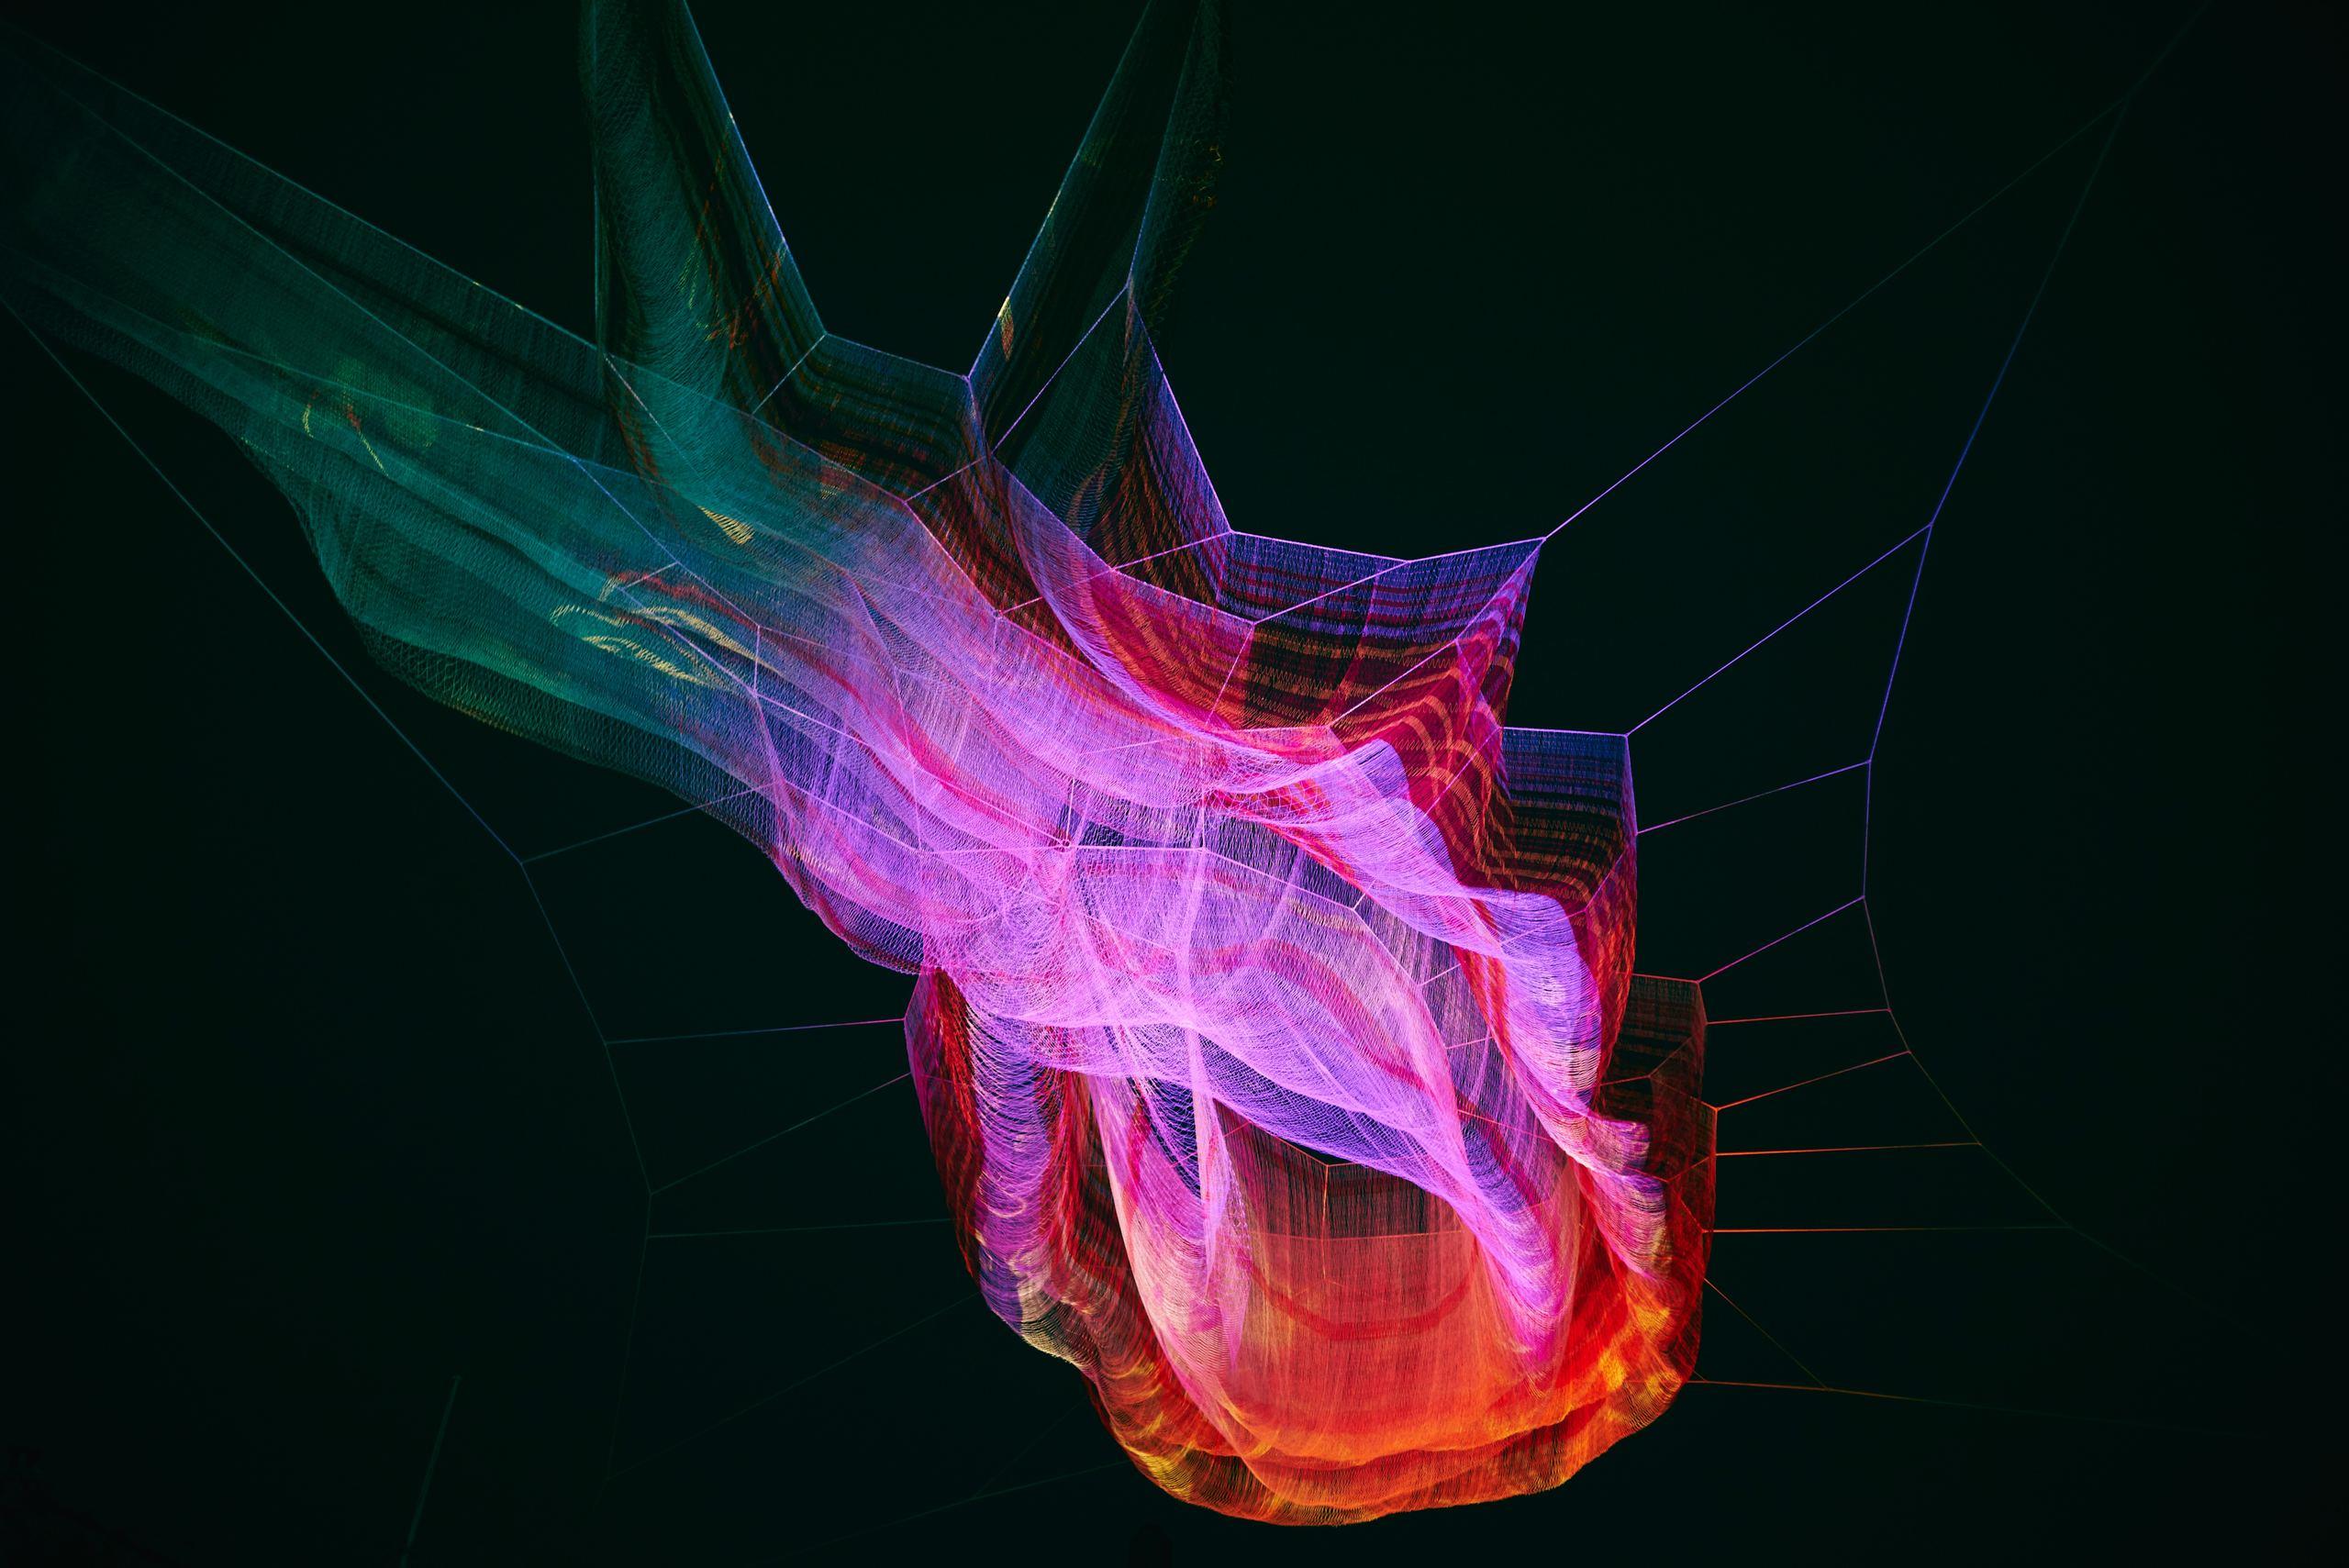 An abstract digital visualisation in vibrant colours